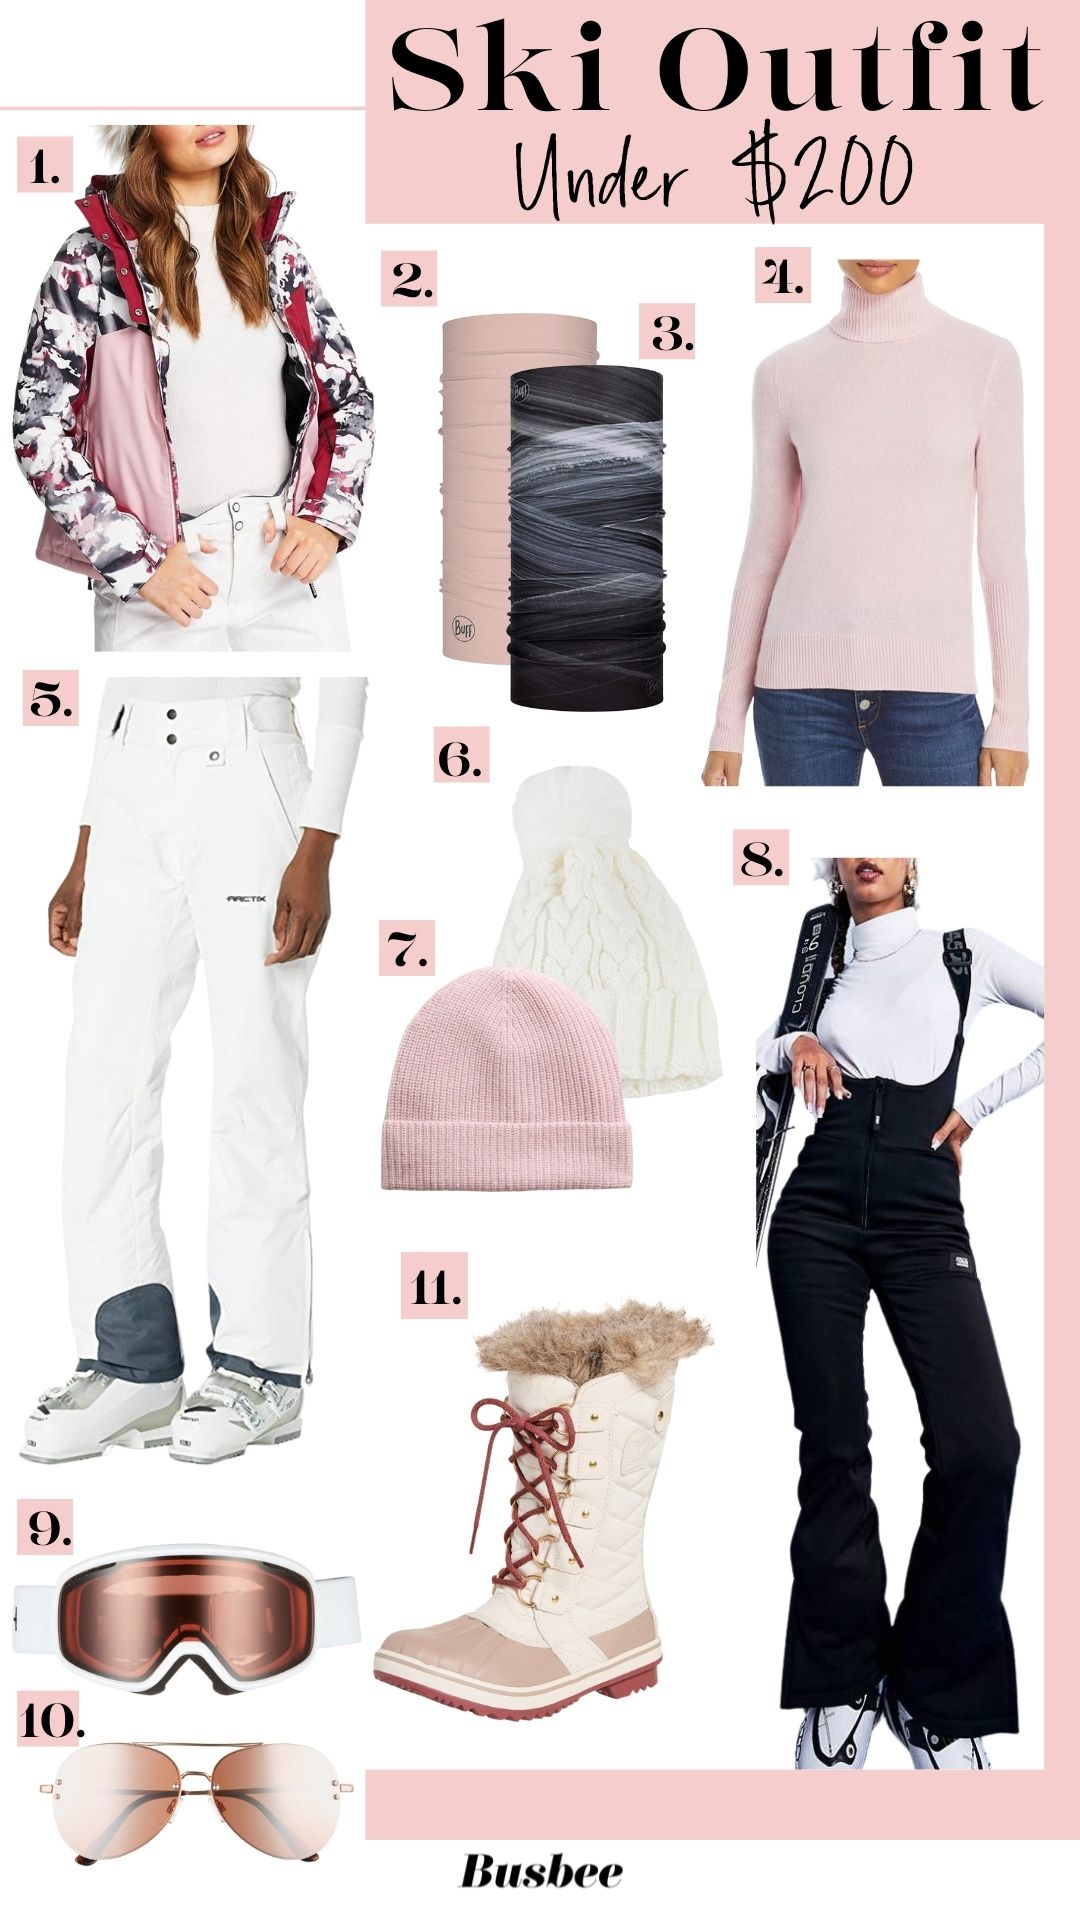 afforable ski outfit, ski clothing on a budget, affordable ski gear, cute affordable ski outfits, cute ski outfits, snow clothes, erin busbee, telluride, colorado